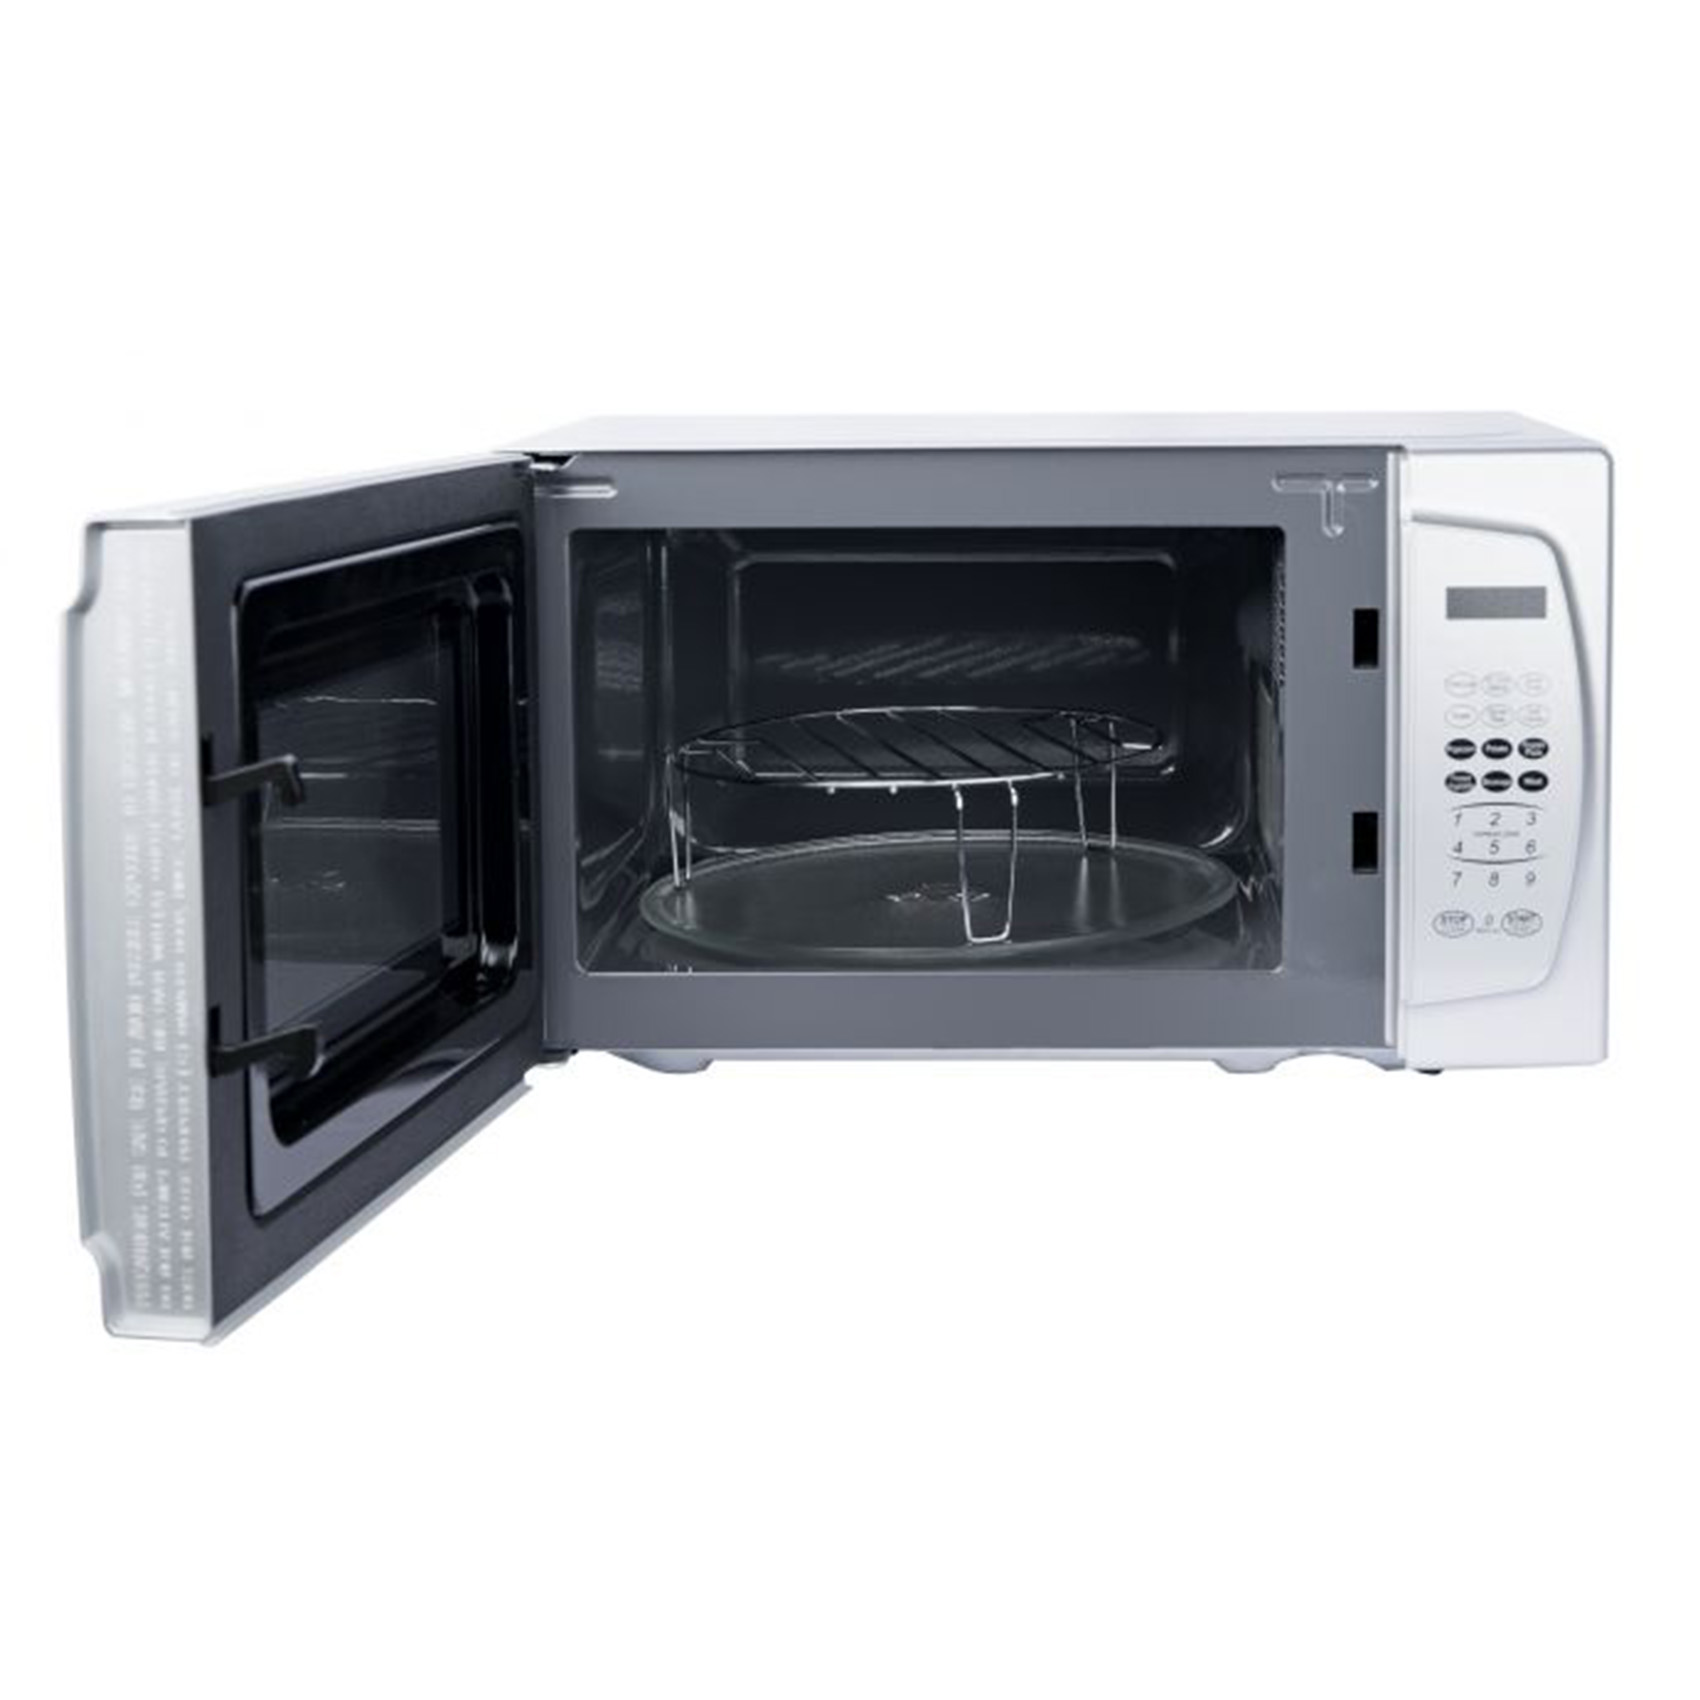 Ramtons Microwave Grill Rm 310